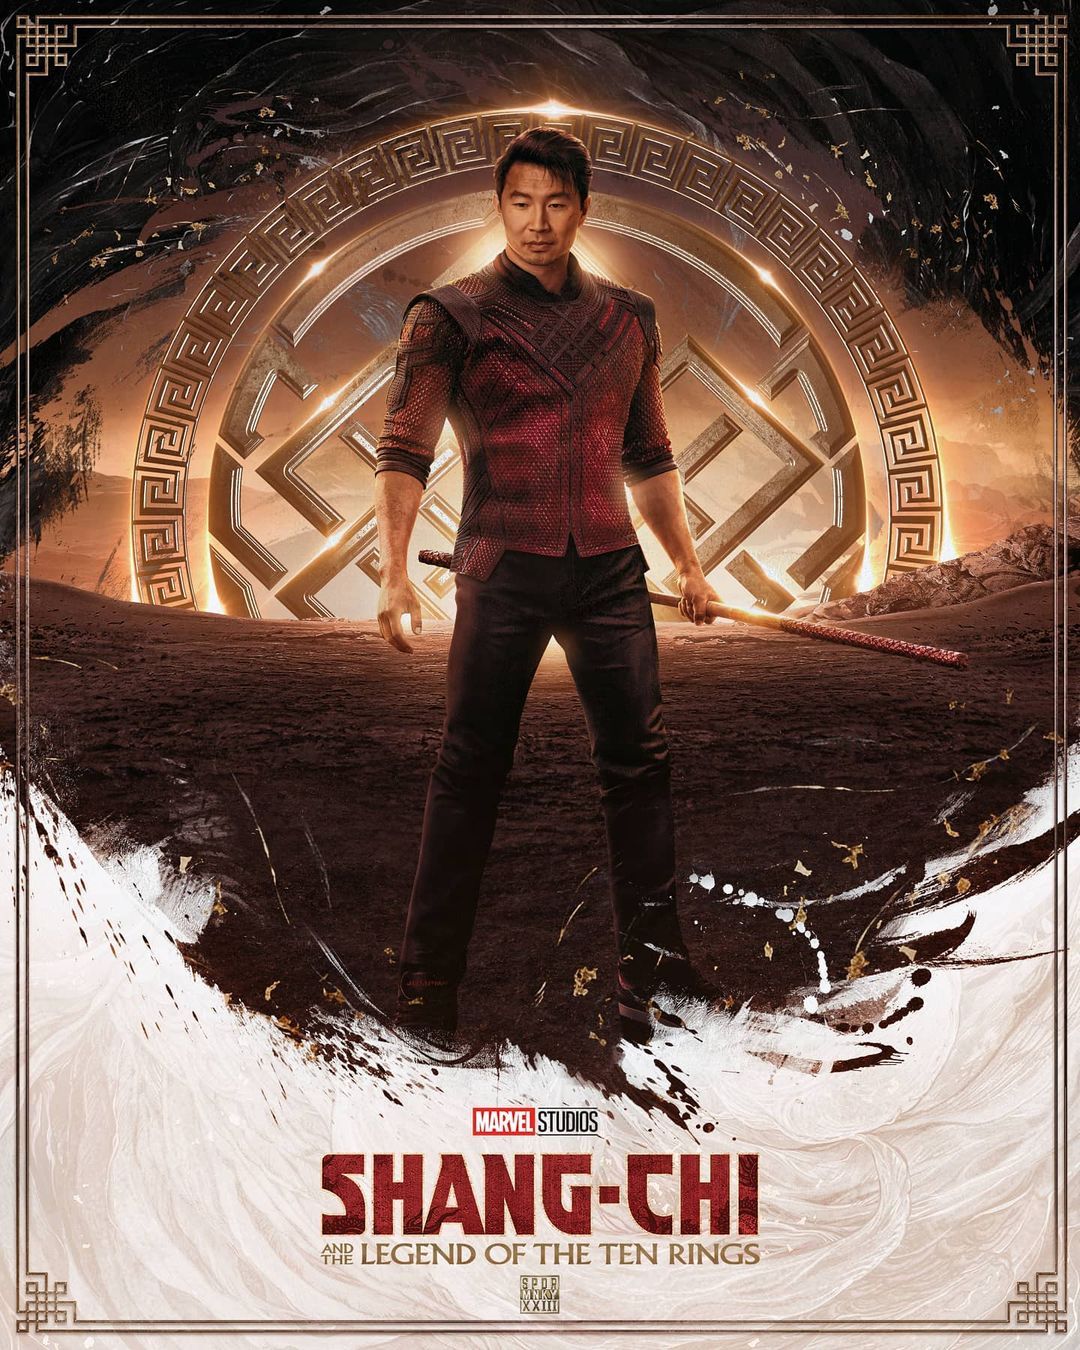 spdrmnkyxxiii posted on their Instagram profile: “The Master of Kung fu. # shangchi So hyped for. Marvel comic universe, Black widow movie, Marvel movies